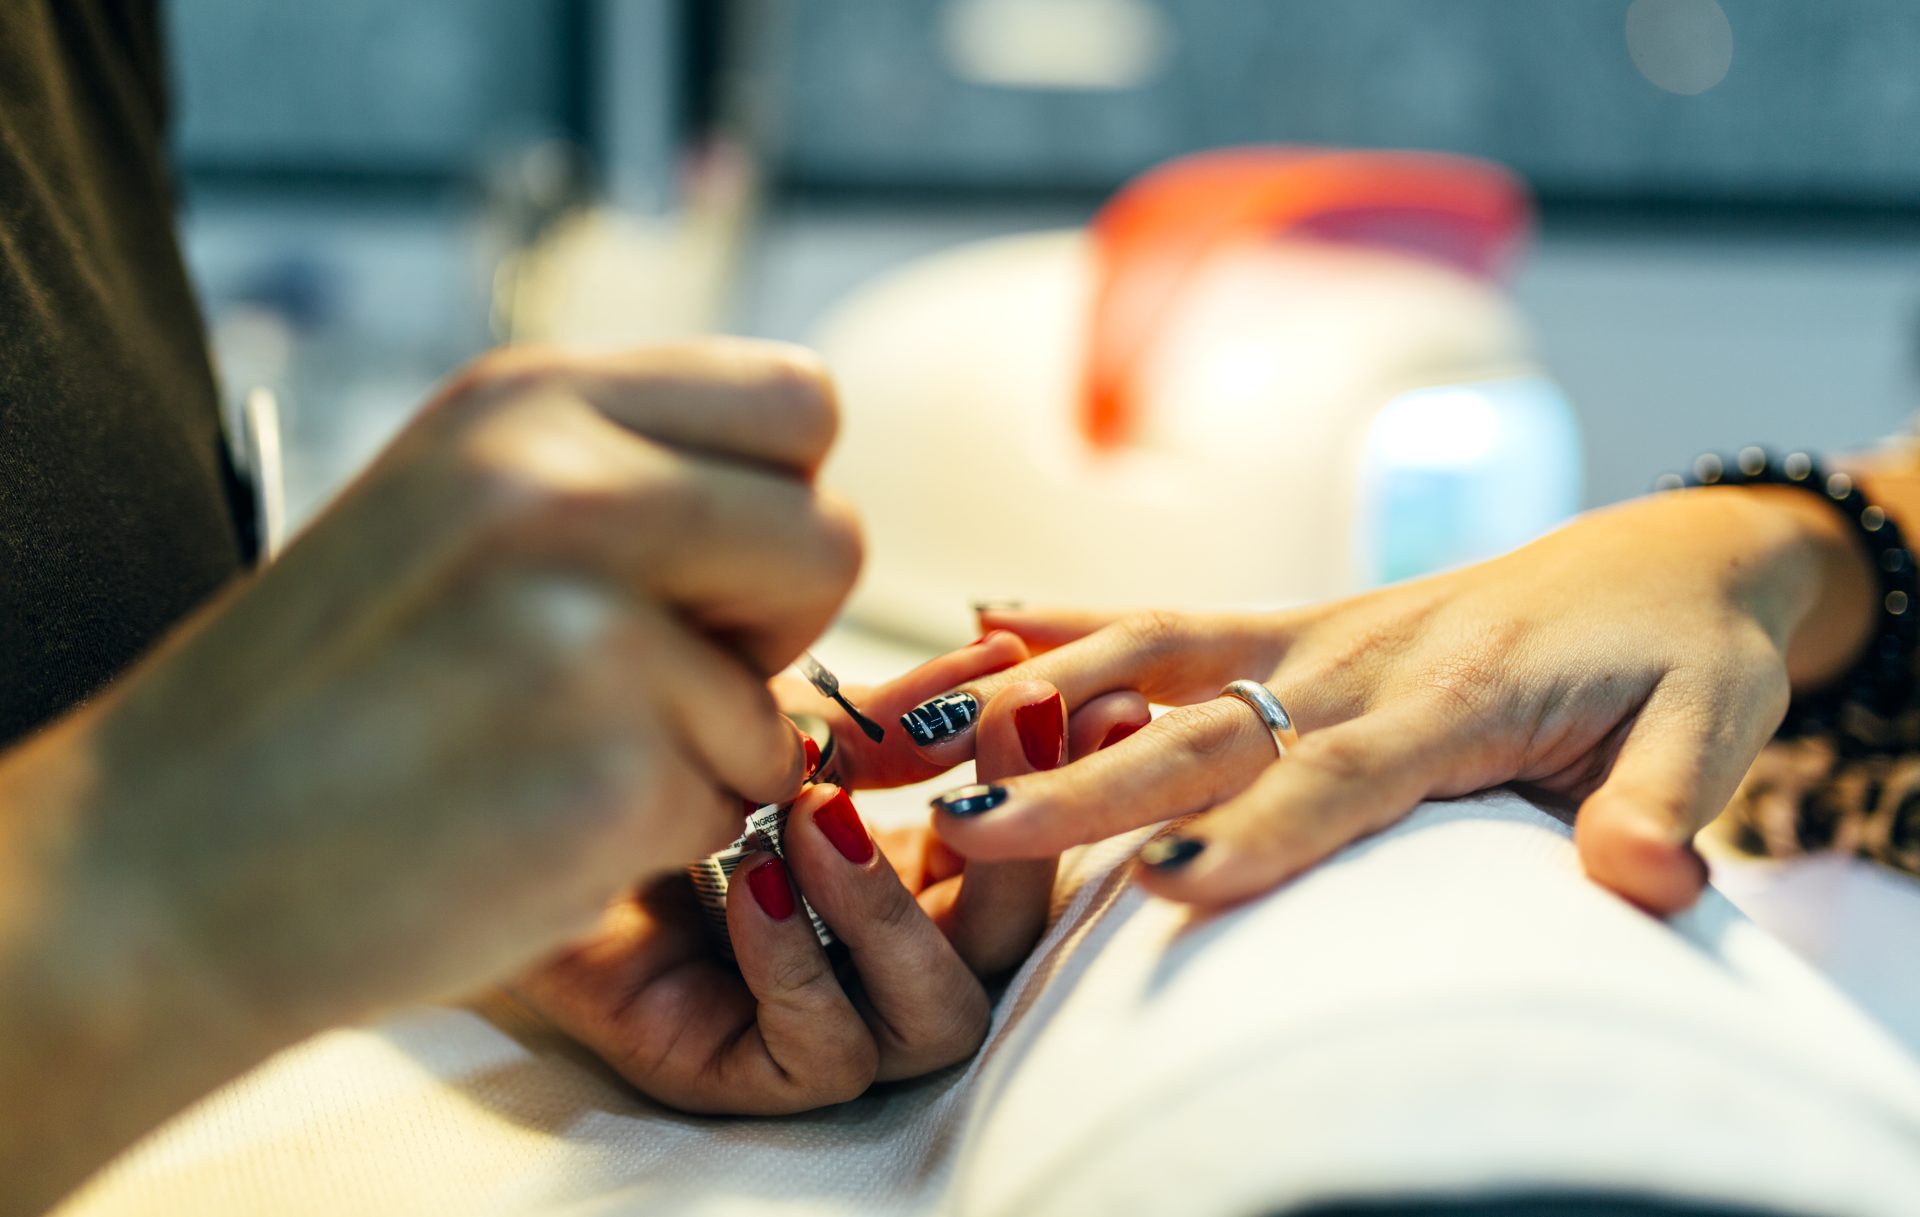 Christian Cuticles Only! Washington Nail Tech Goes Viral After Listing Designs Her Christian-Based Business Refuses To Offer thumbnail